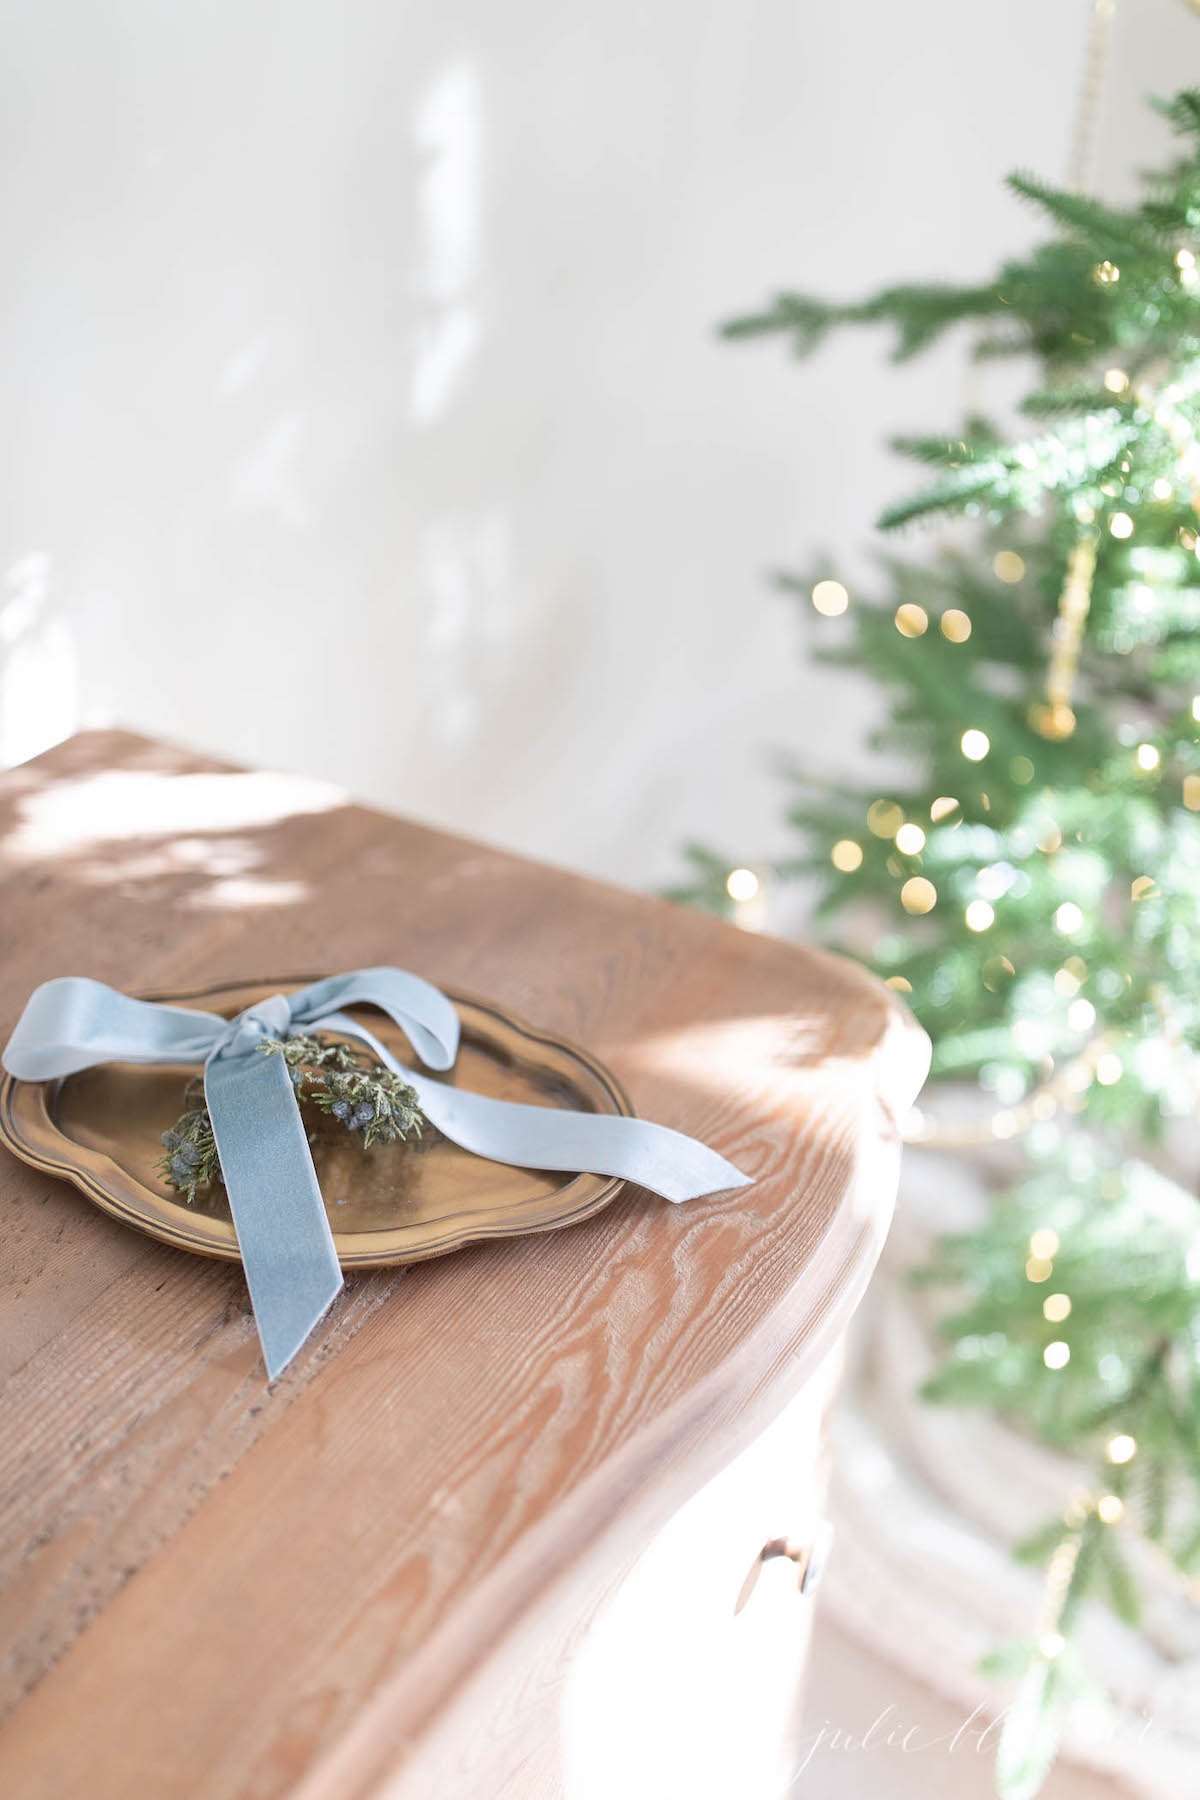 A blue ribbon adorns a wooden table next to a Christmas tree, combining blue and holiday decor elements.